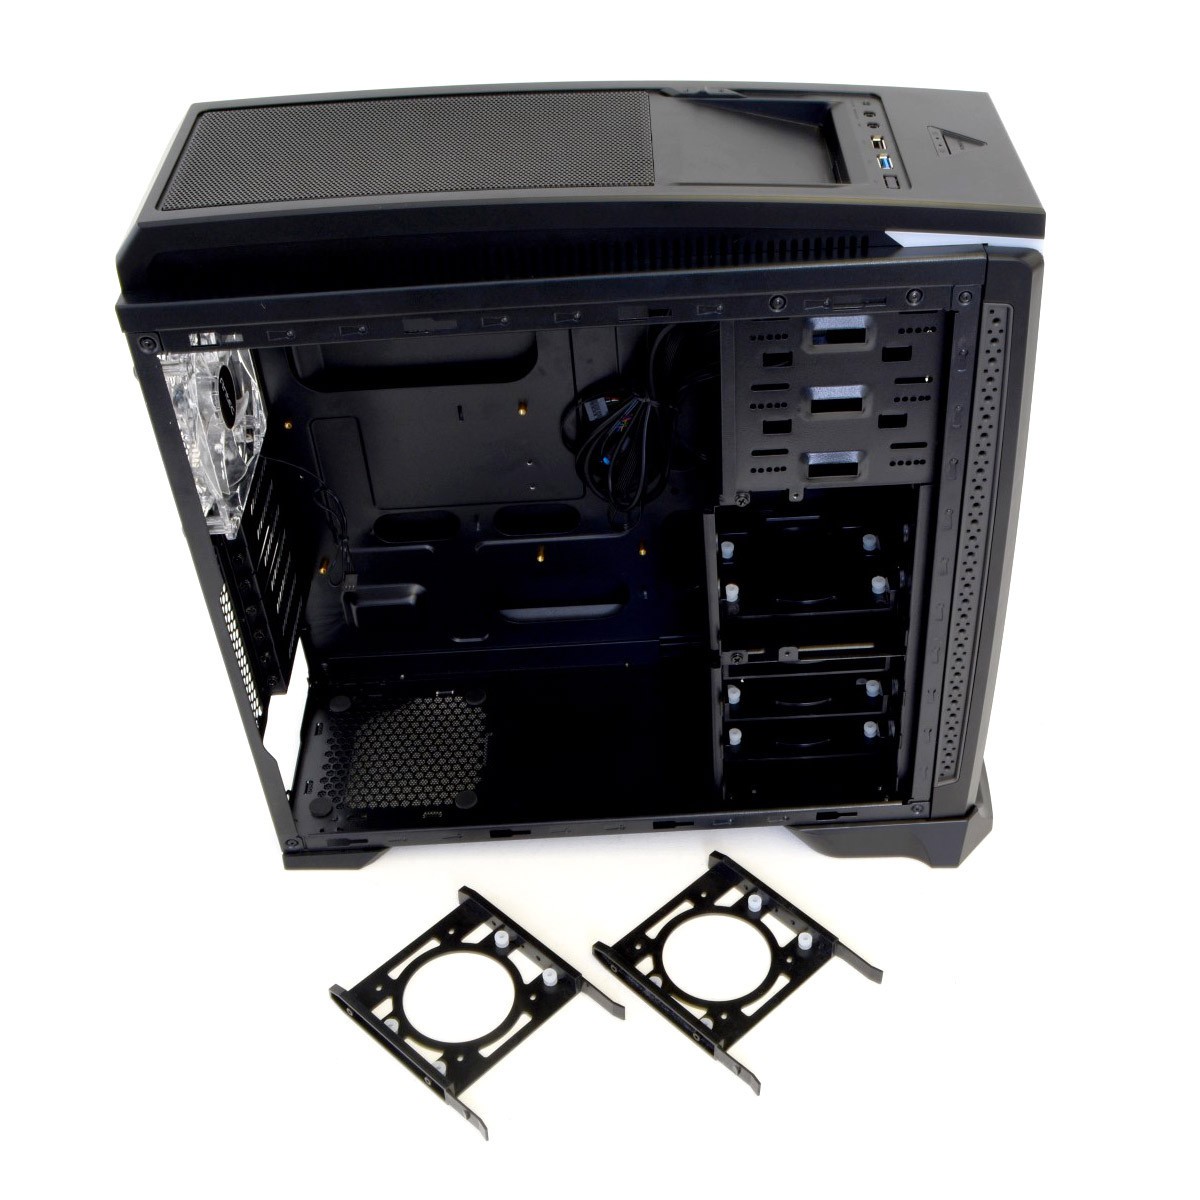 Antec PC Case Has Enough Space for Even the Best Graphics Cards